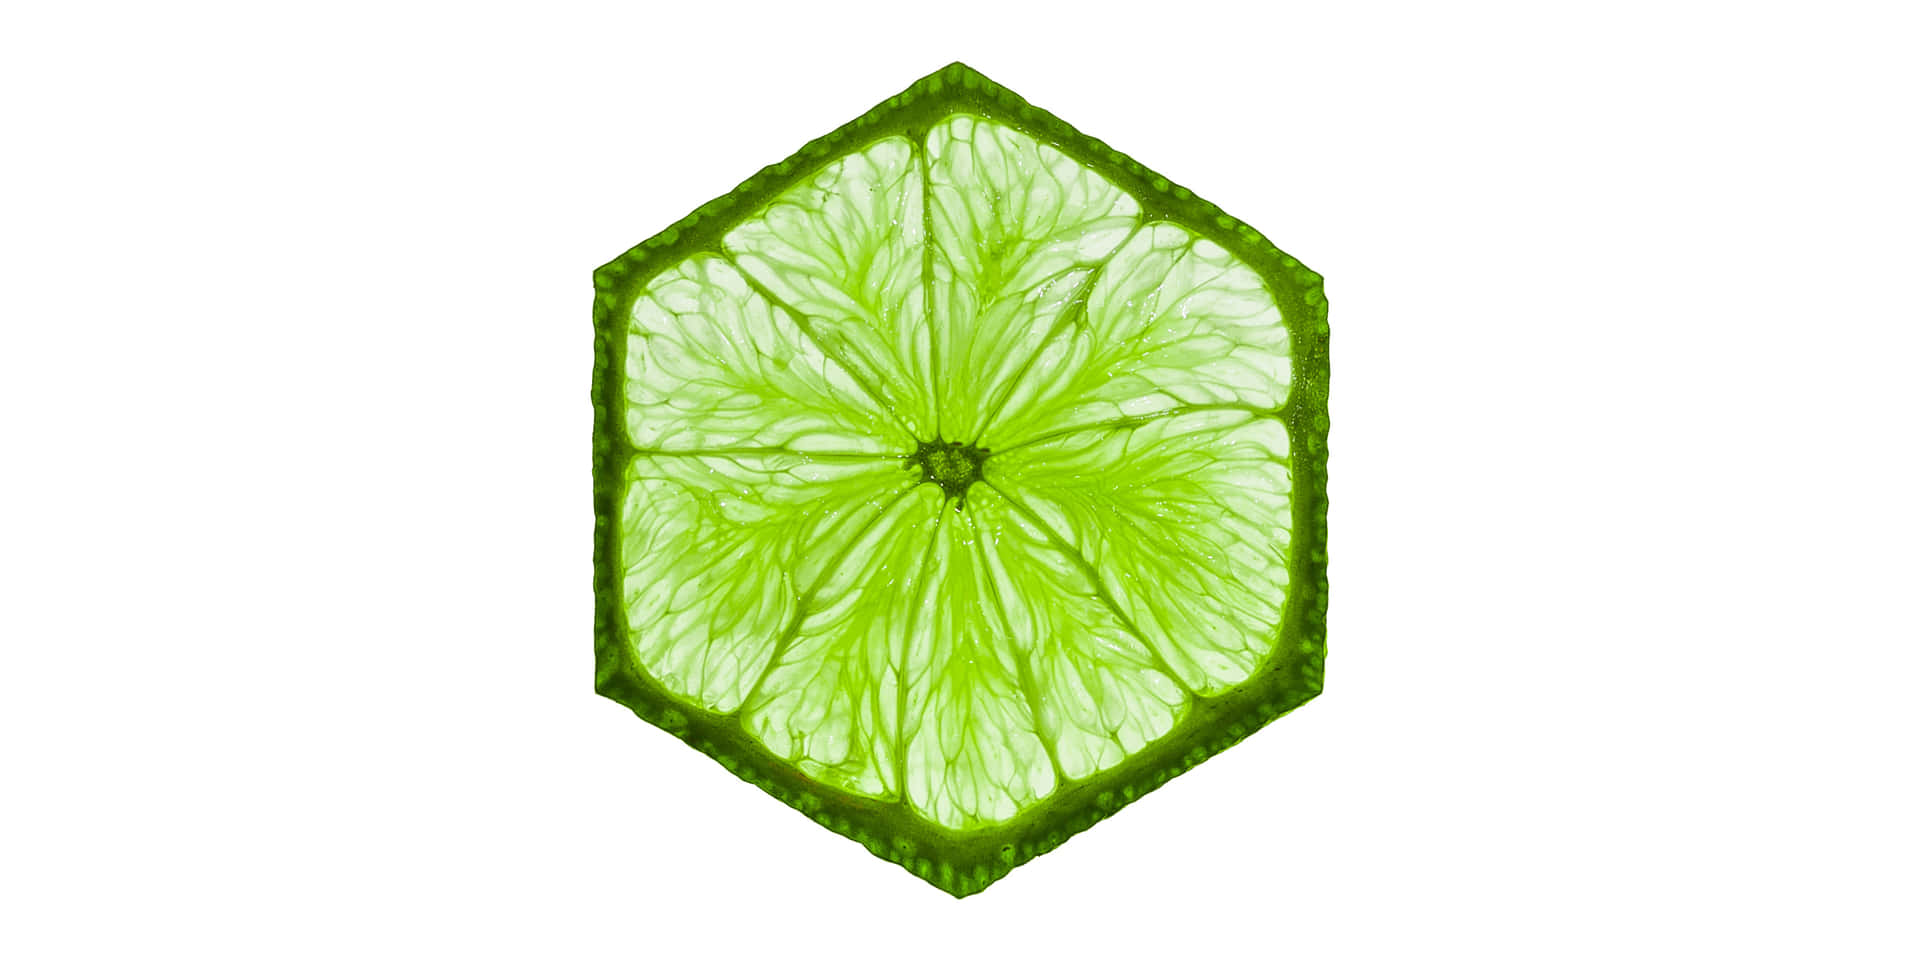 A Green Slice Of Lime On A White Background